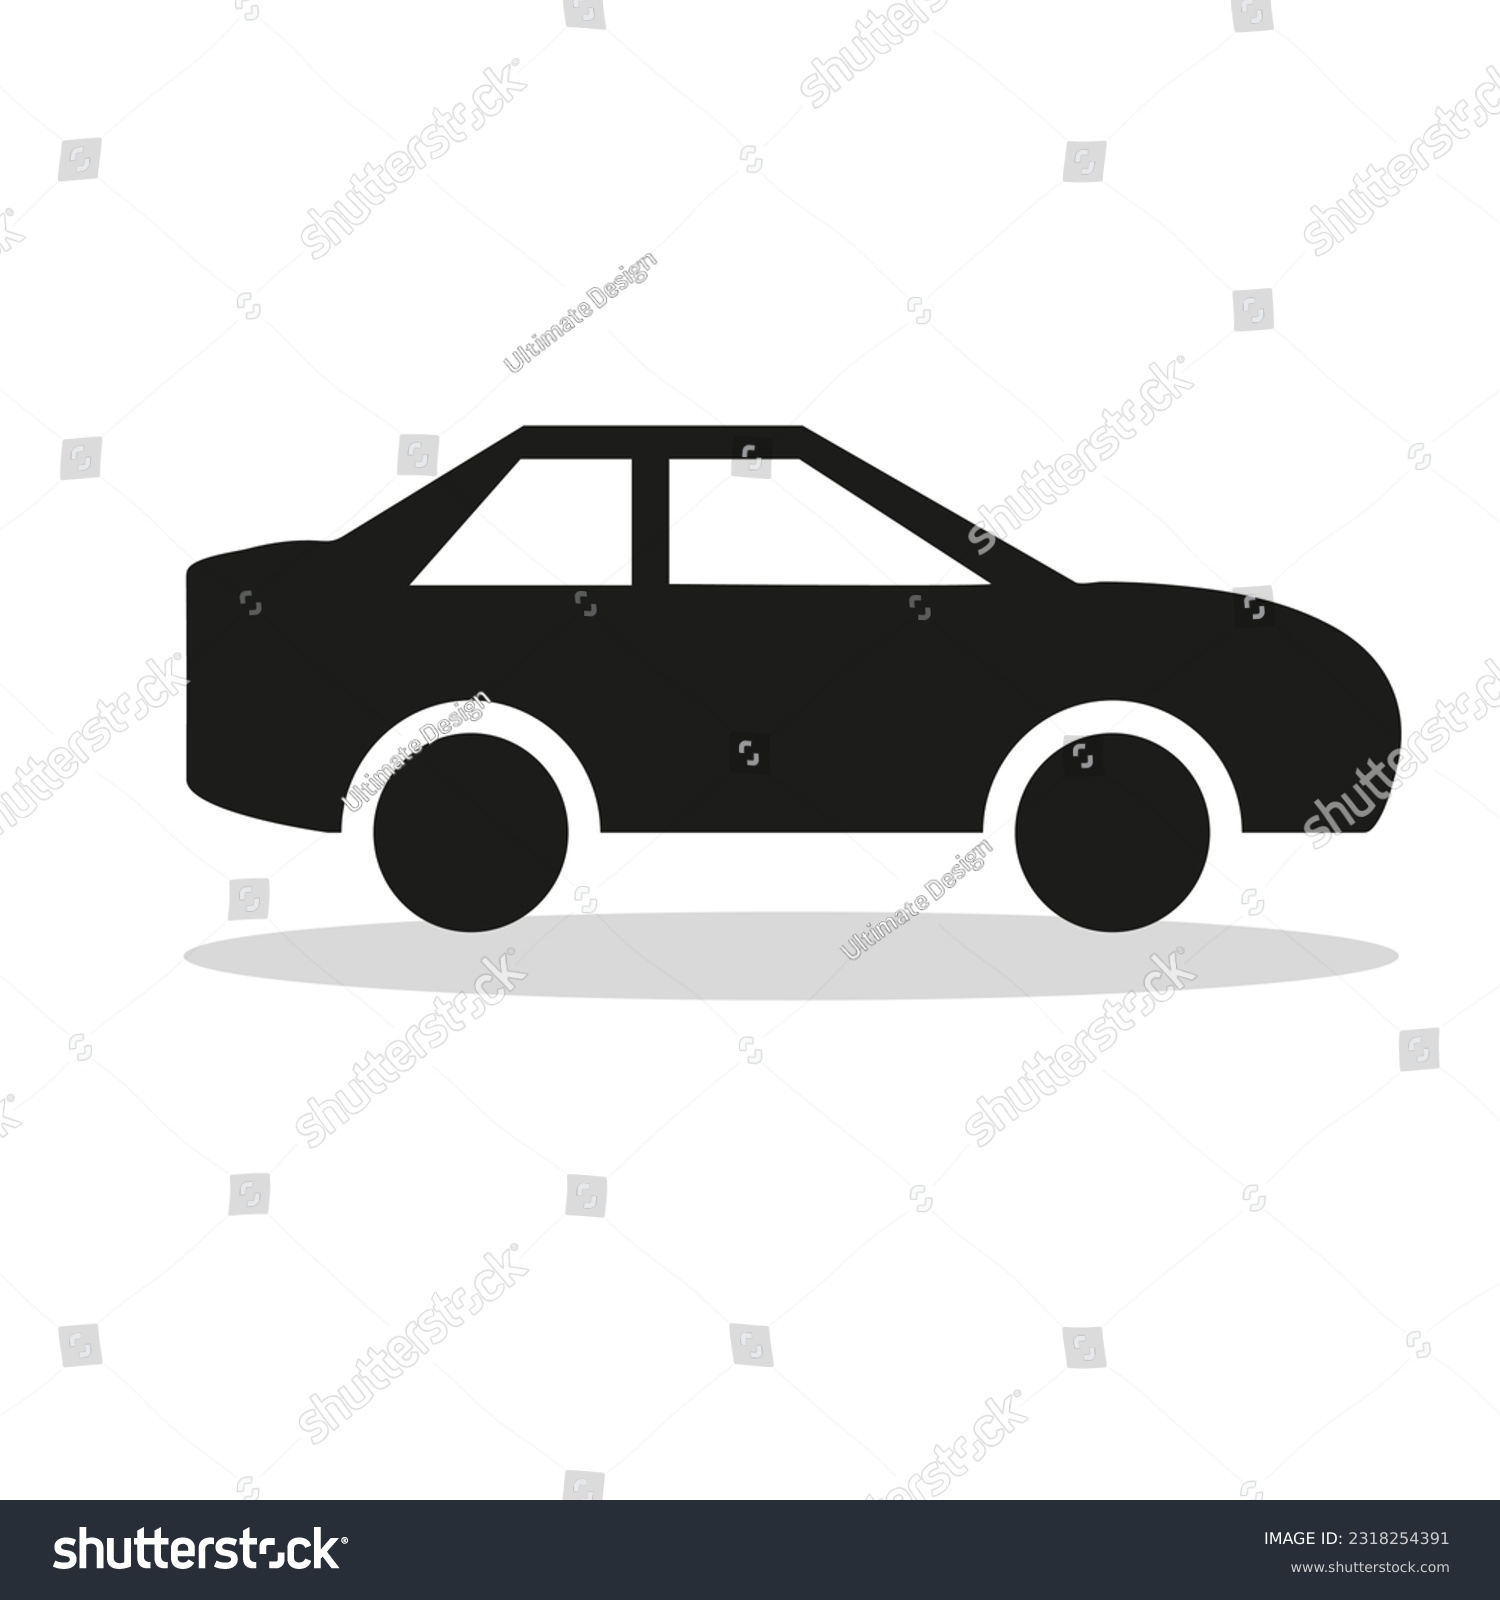 SVG of car vector,Car. monochrome icon,Coupe Car Icon,car icon,Vector car Icon,car icon vector isolated illustration svg